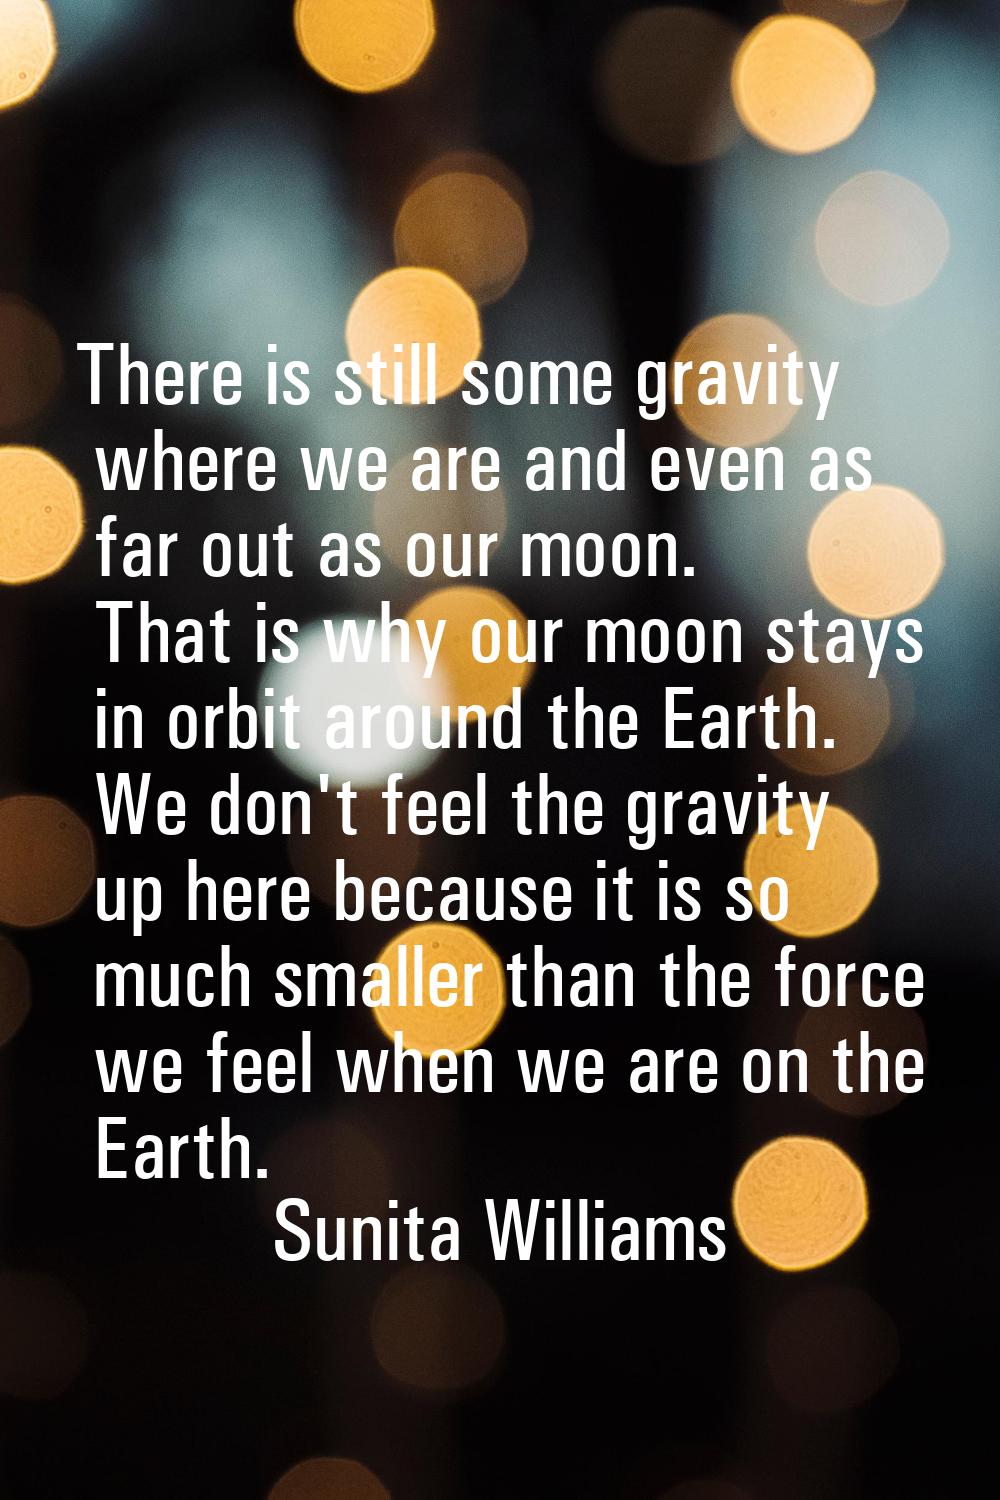 There is still some gravity where we are and even as far out as our moon. That is why our moon stay